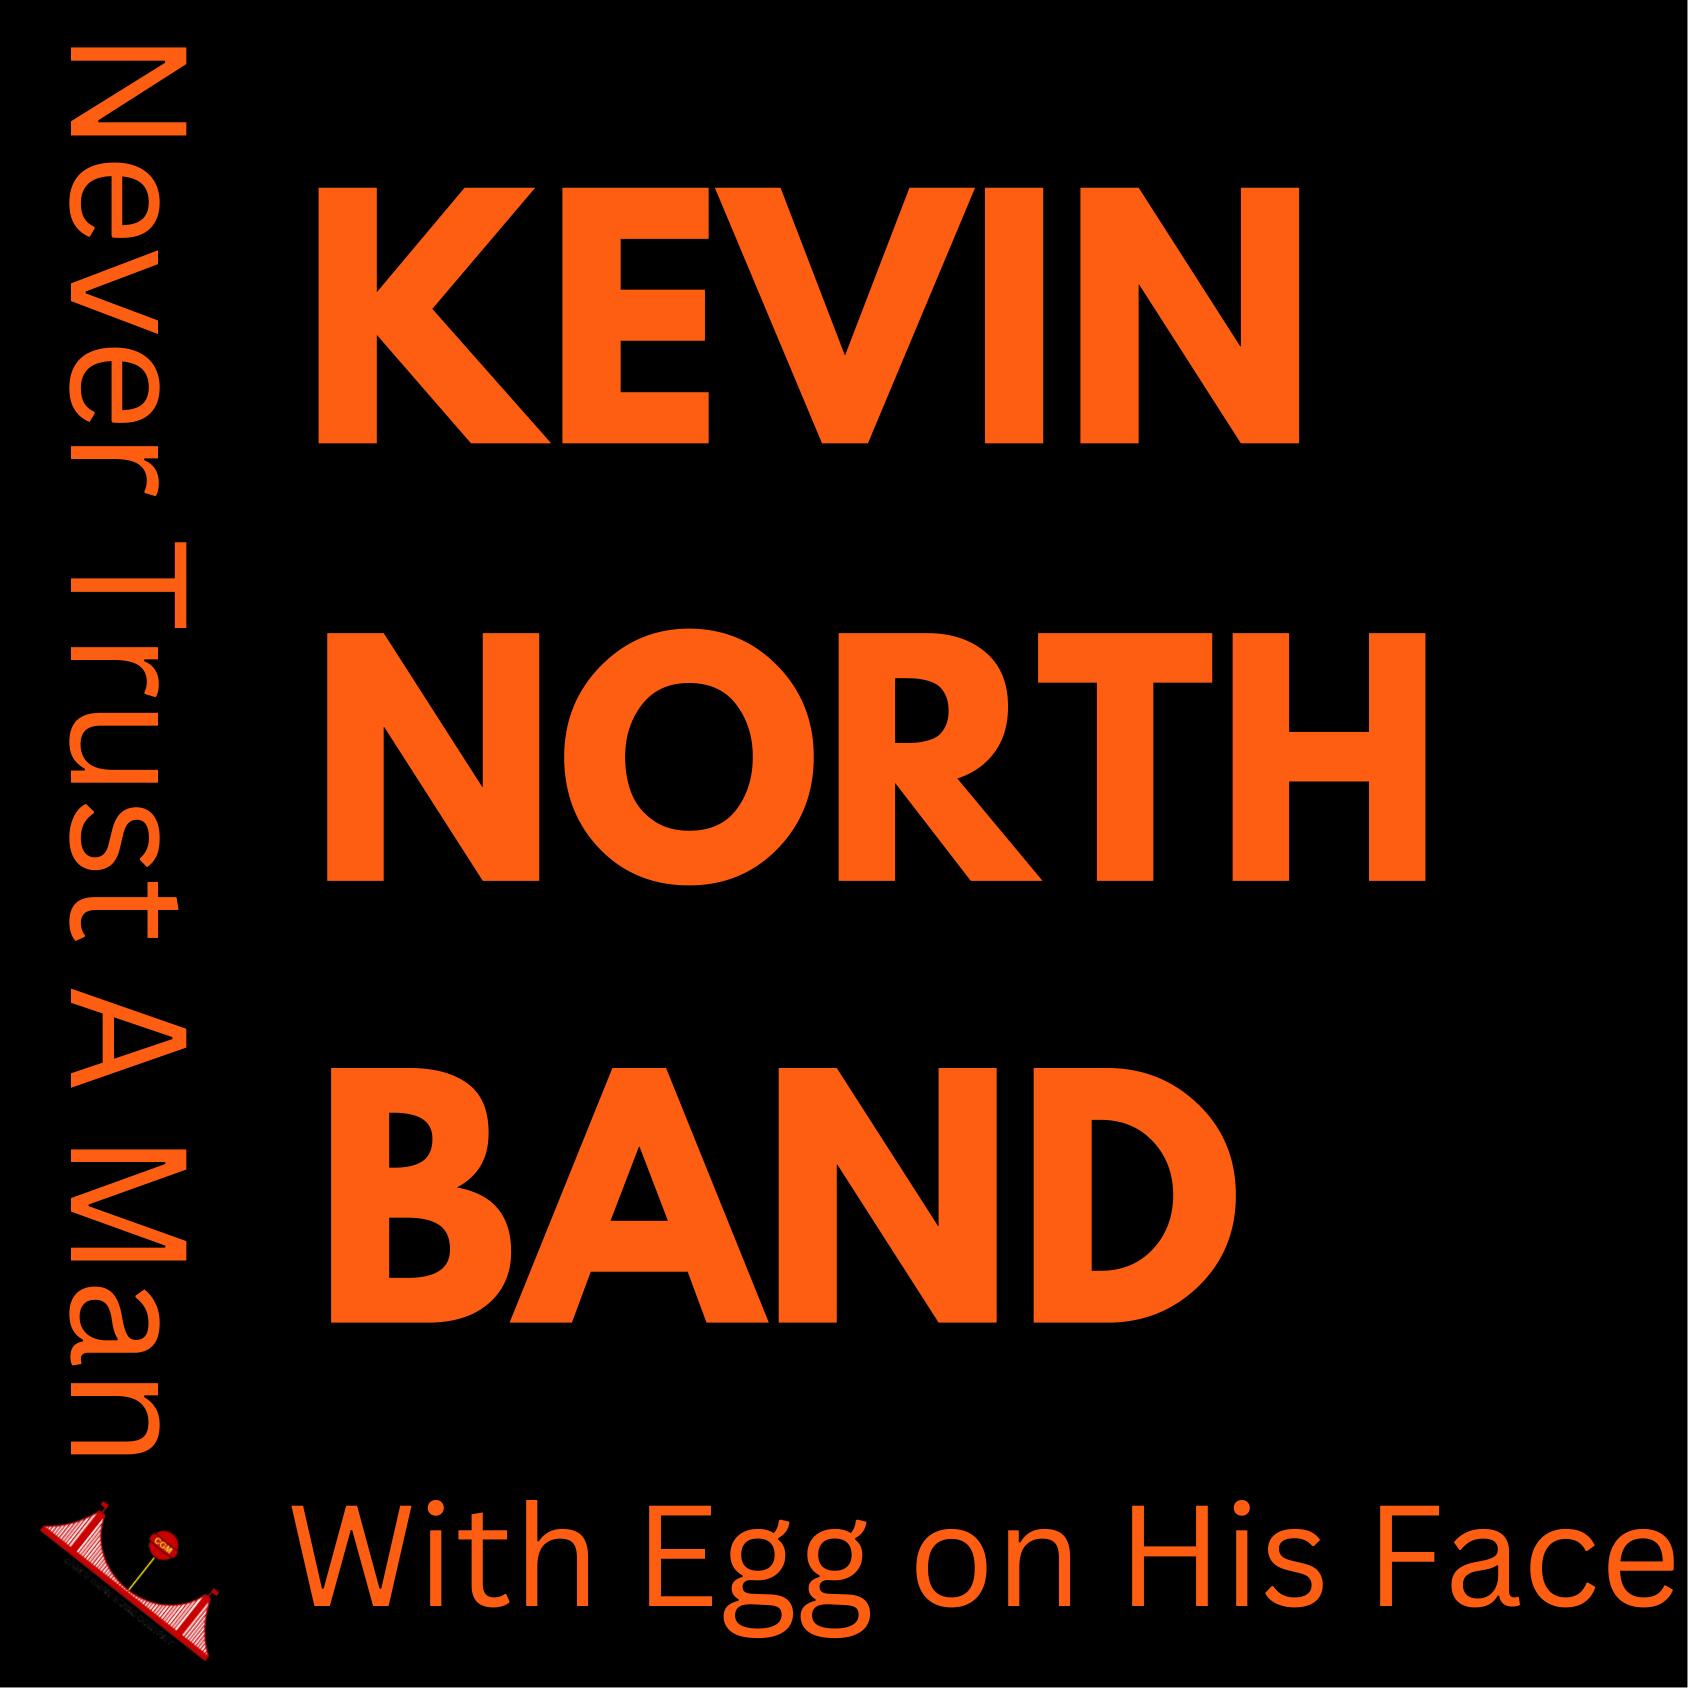 Kevin North Band New Adam Ant Cover Single "Never Trust A Man With Egg On His Face" Now Available Worldwide 